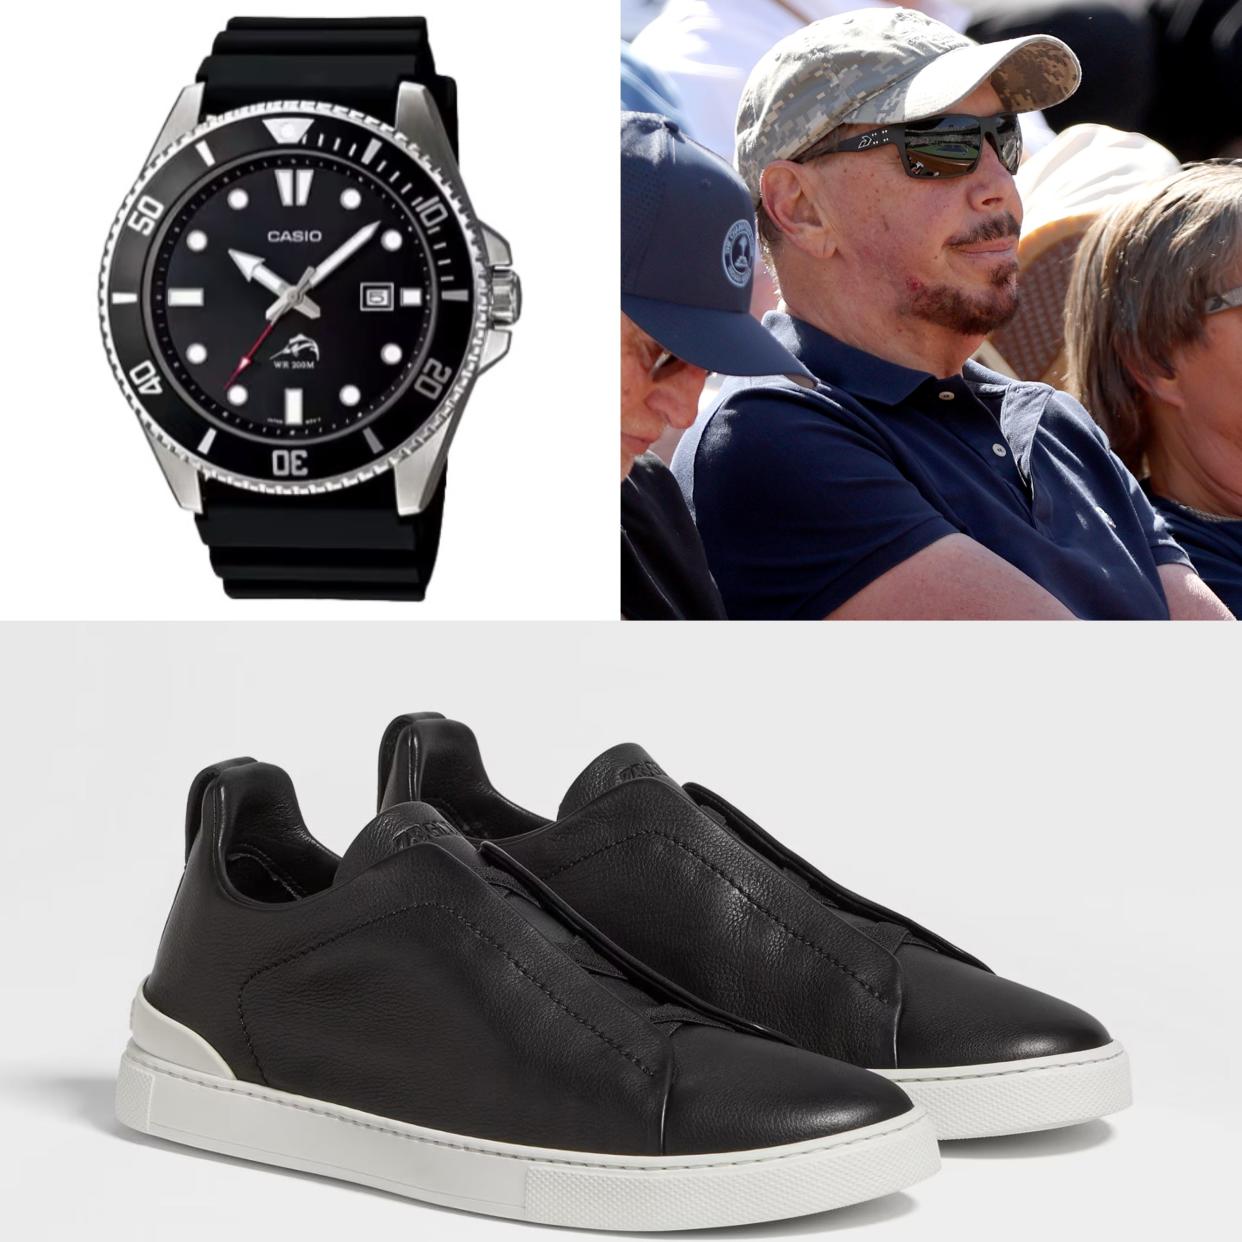 A composite image of a Casio watch, a man wearing sunglasses, and a pair of black sneakers.